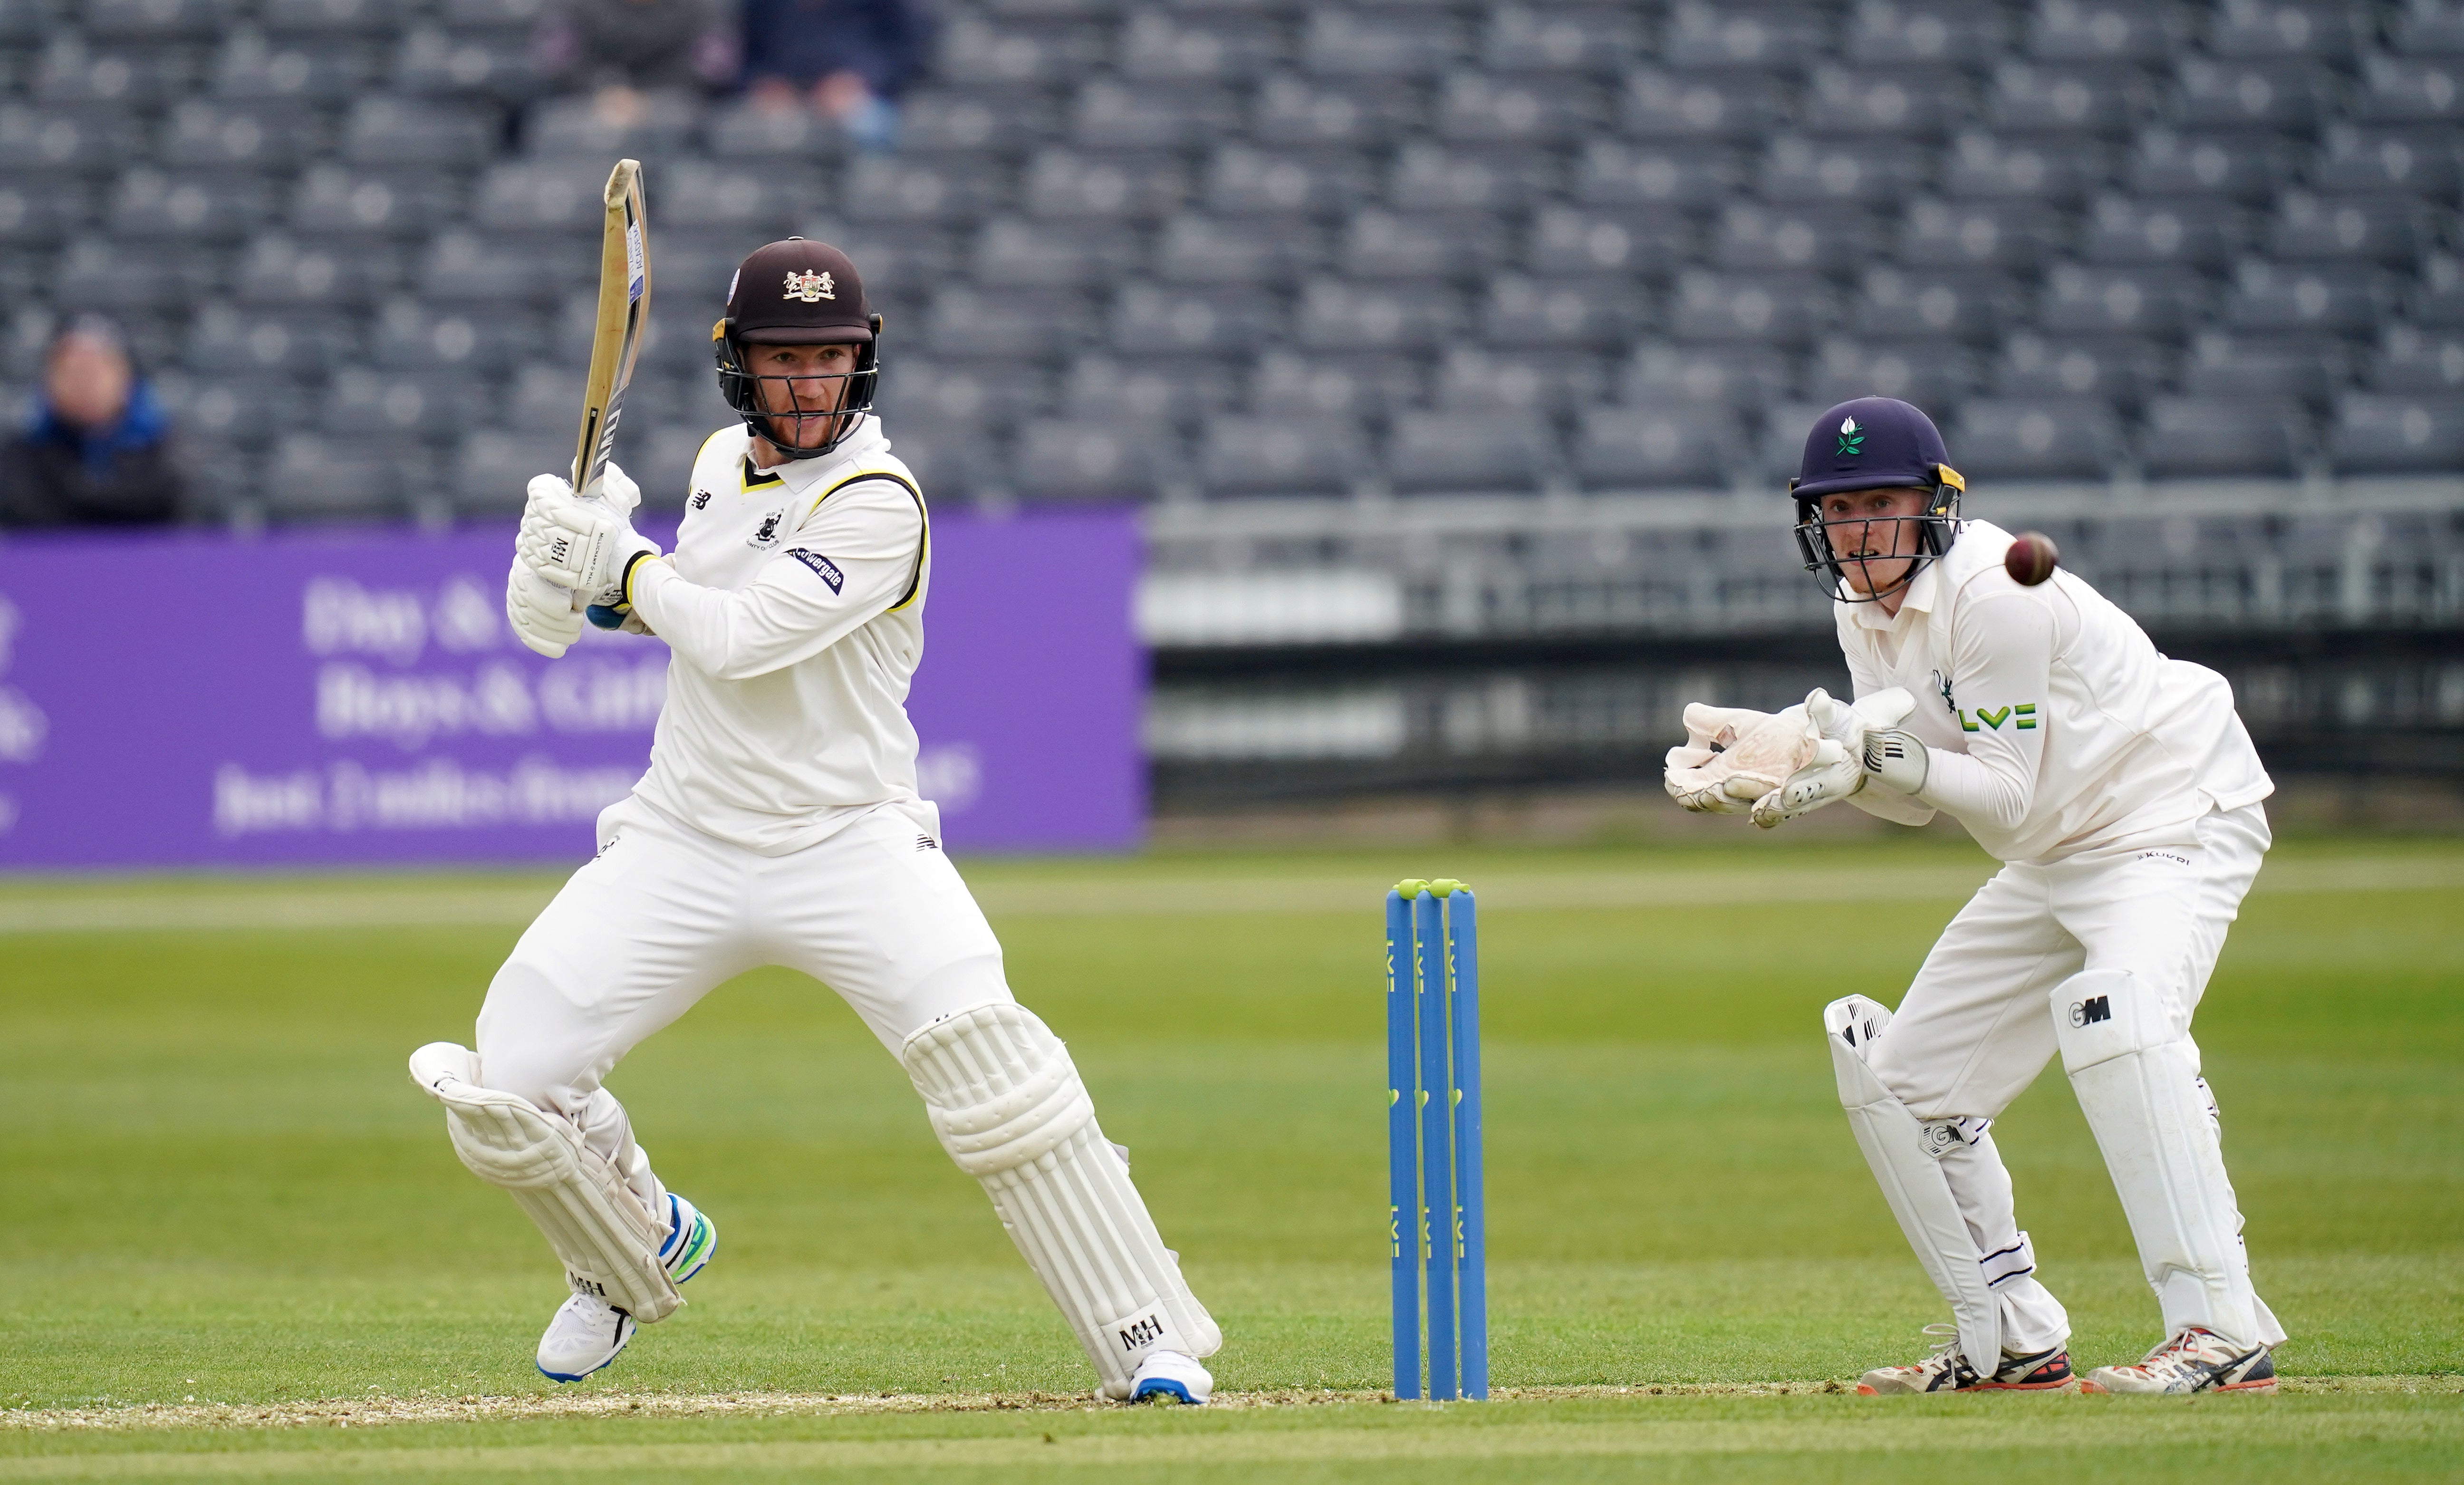 Gloucestershire’s James Bracey, left, represented England at Test level last summer (David Davies/PA)